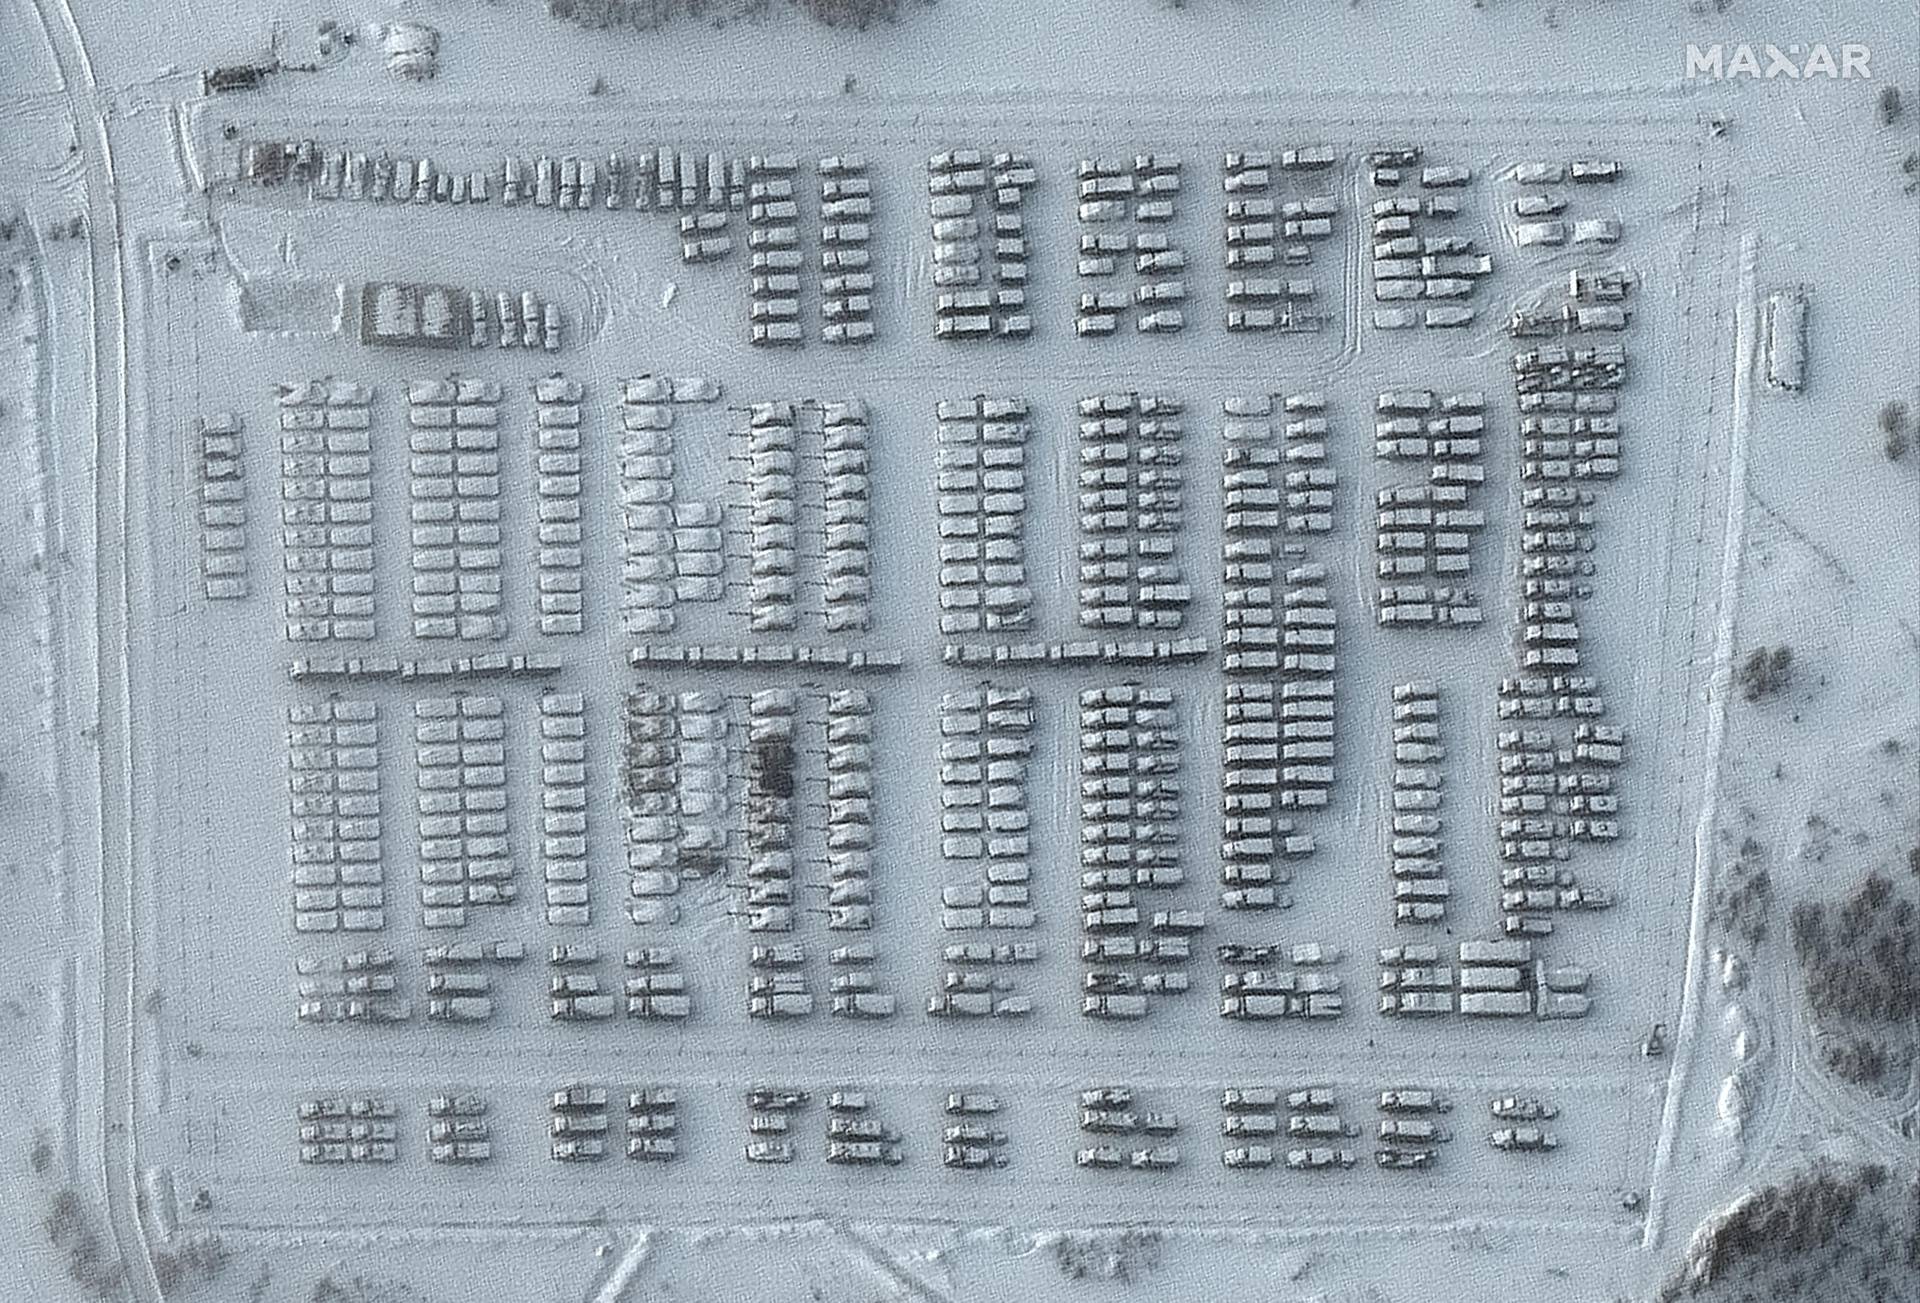 A satellite image shows the overview of a battle group vehicle park in Yelnya